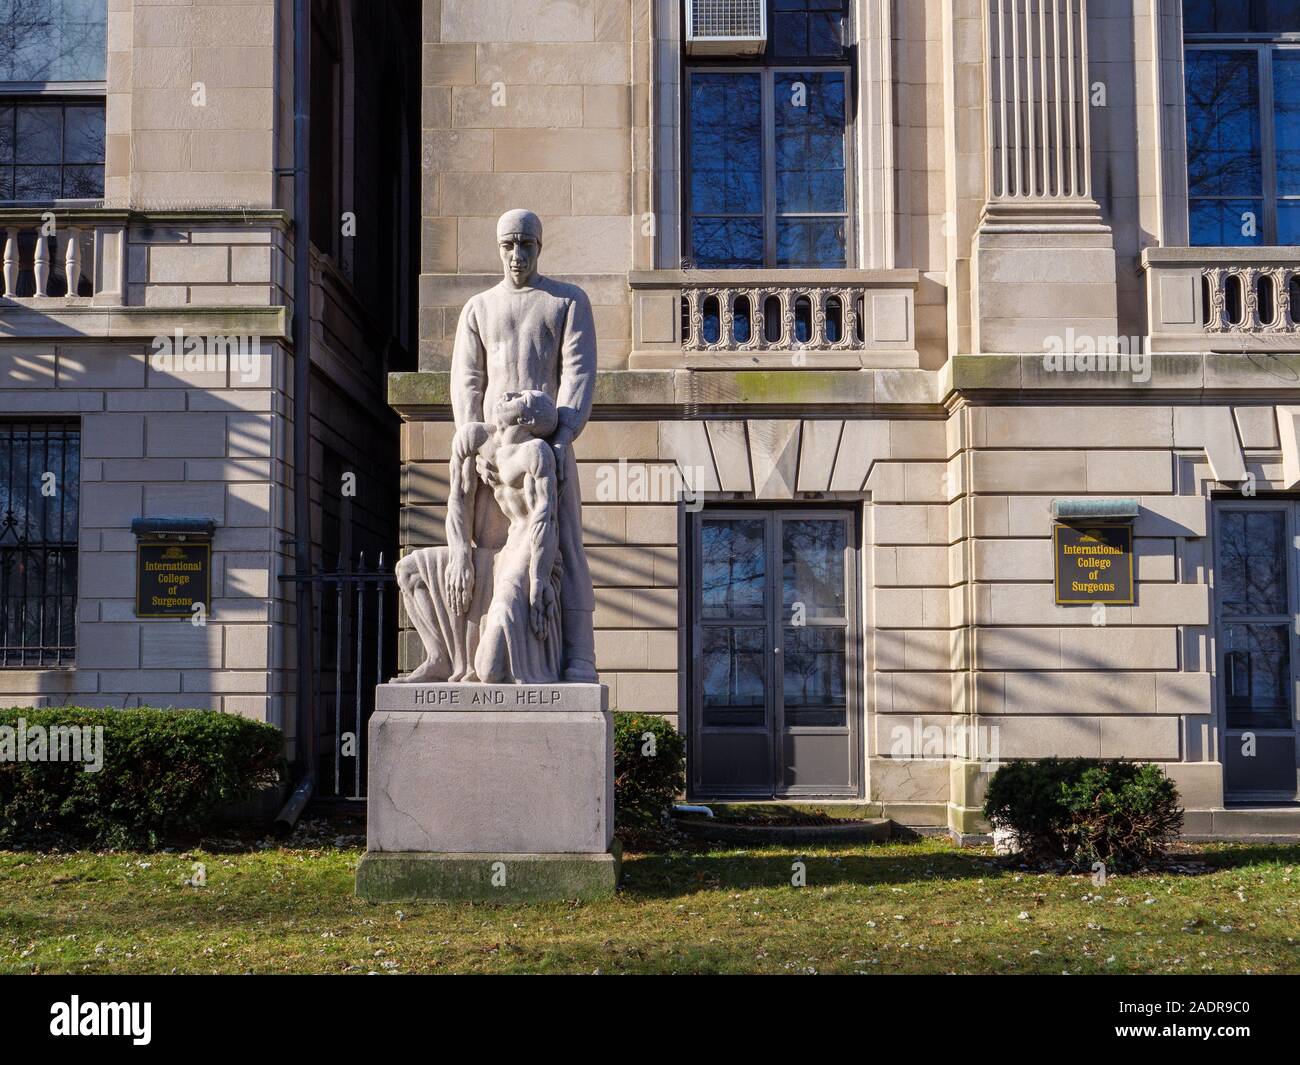 Hope and Help statue. International College of Surgeons, Chicago, Illinois. Stock Photo